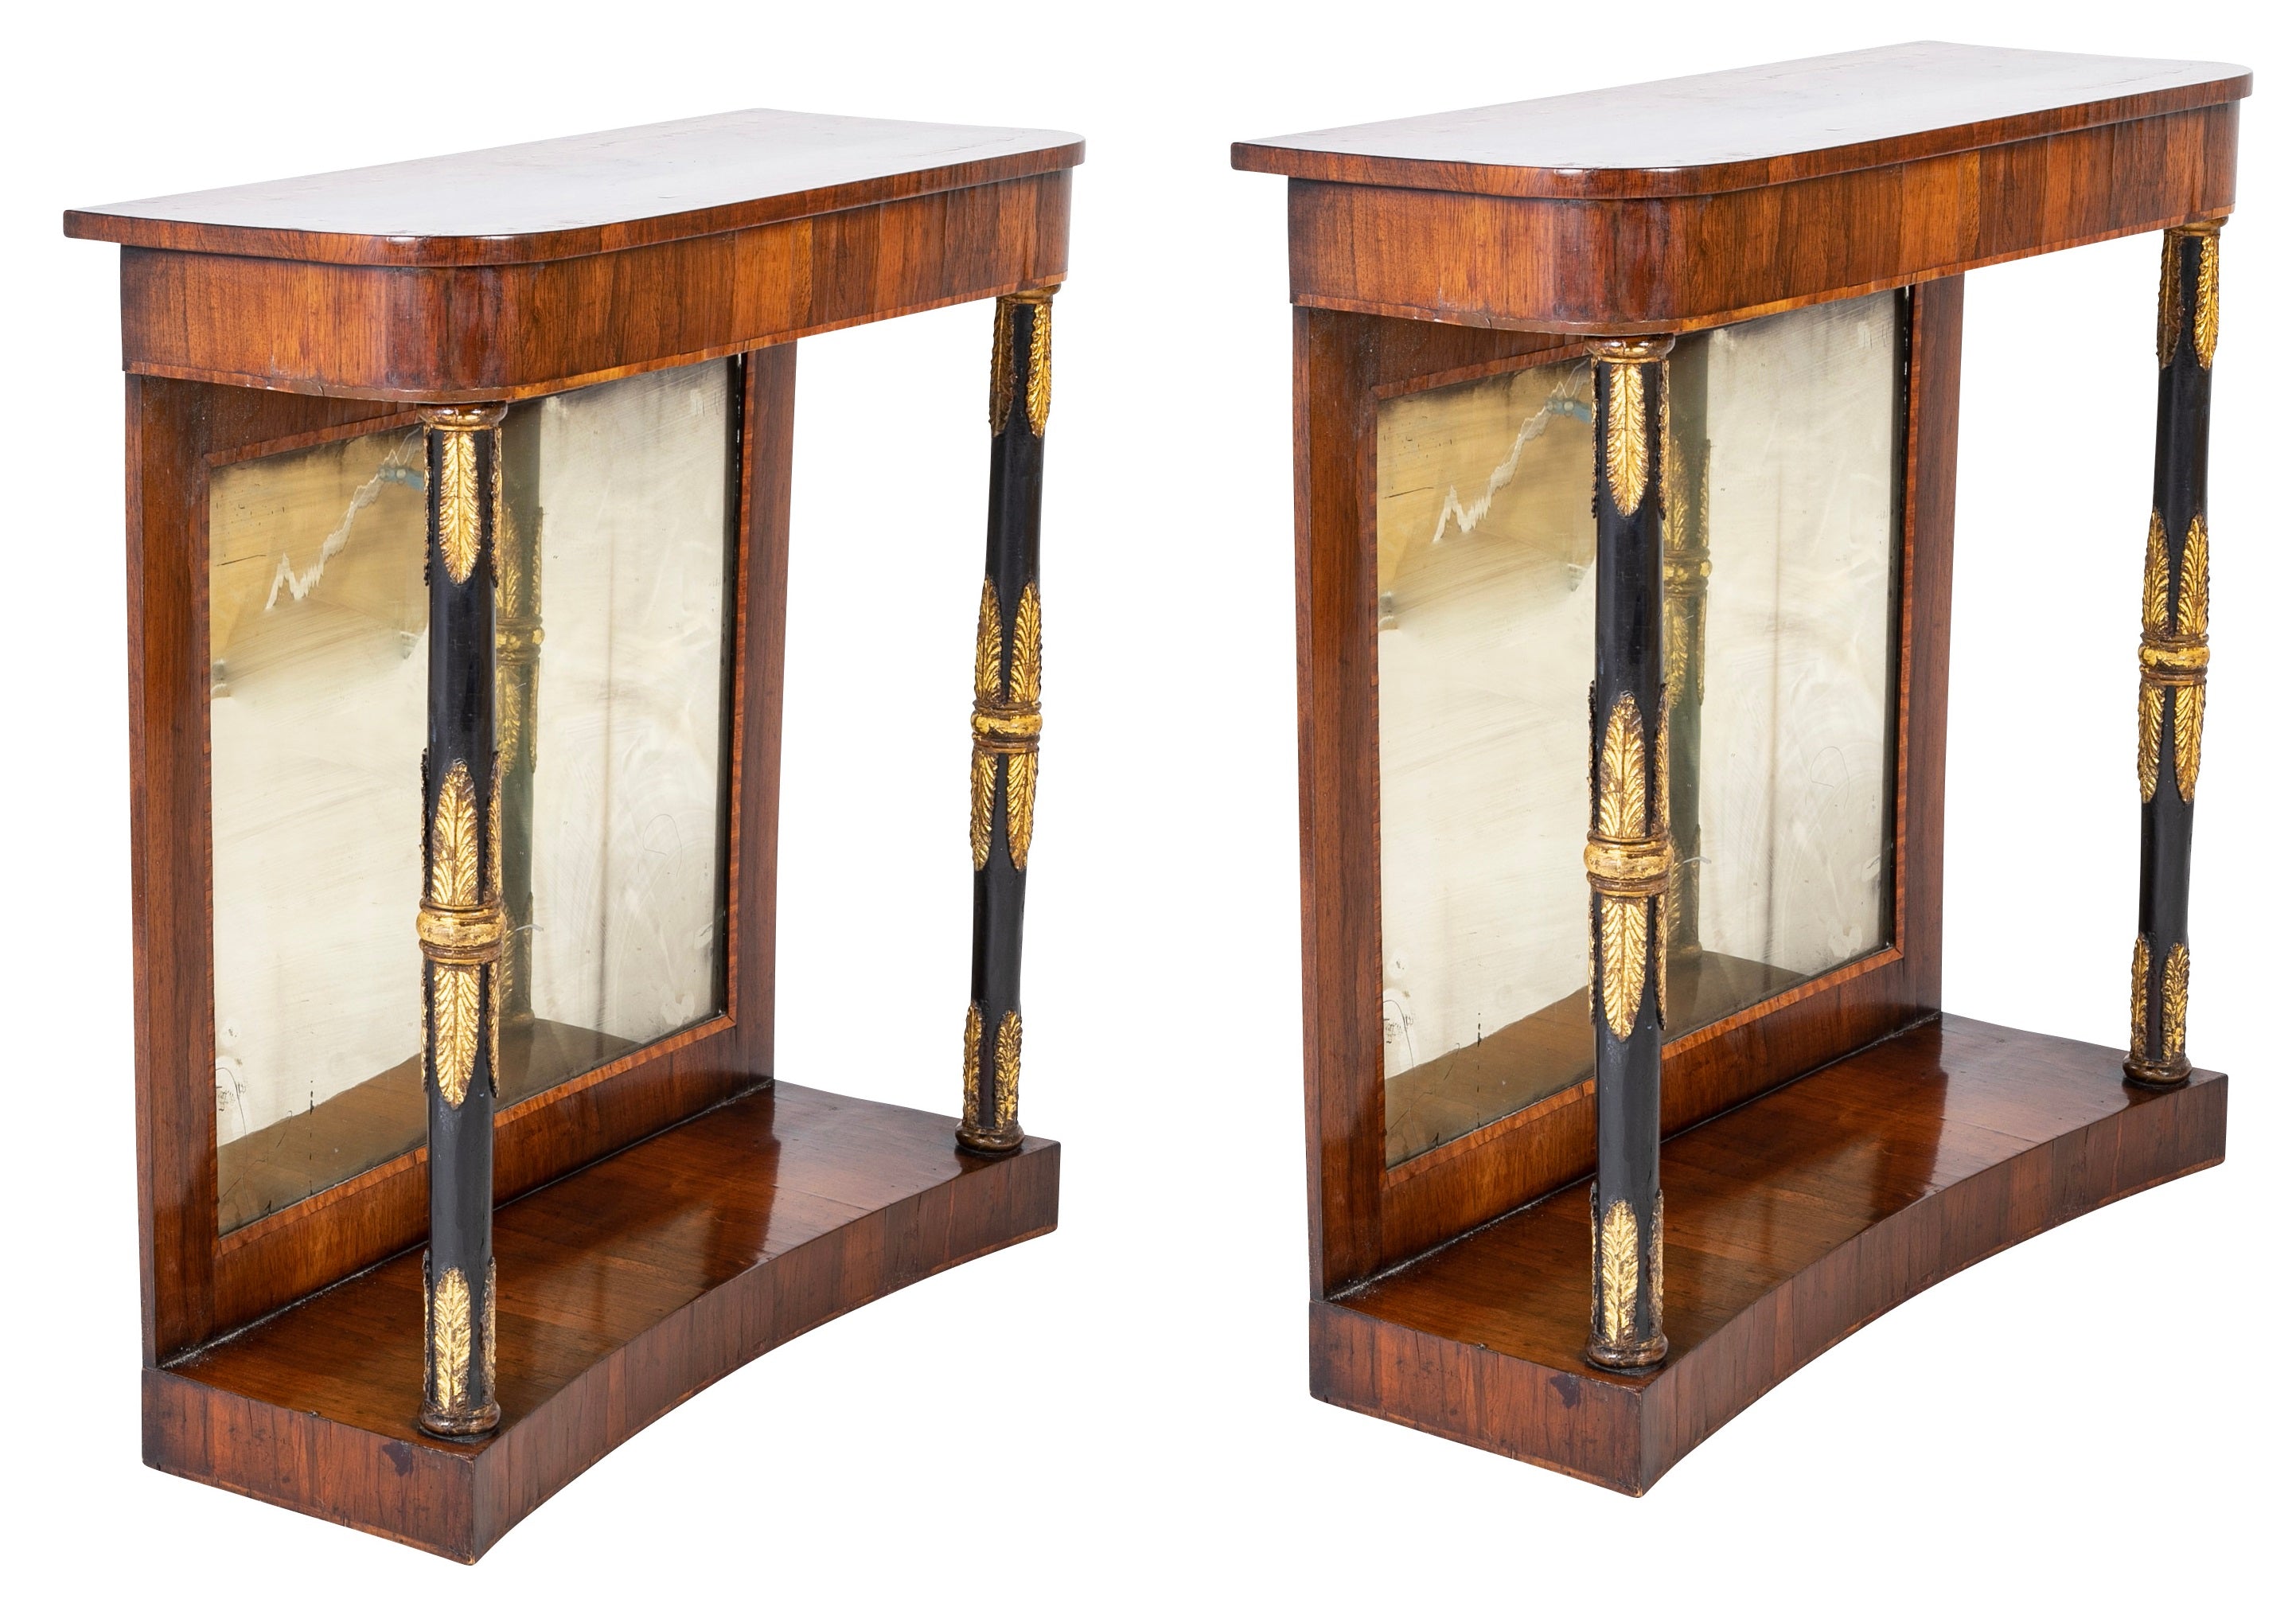 Pair of Early 19th Century Regency Rosewood Mirror Back Console Tables